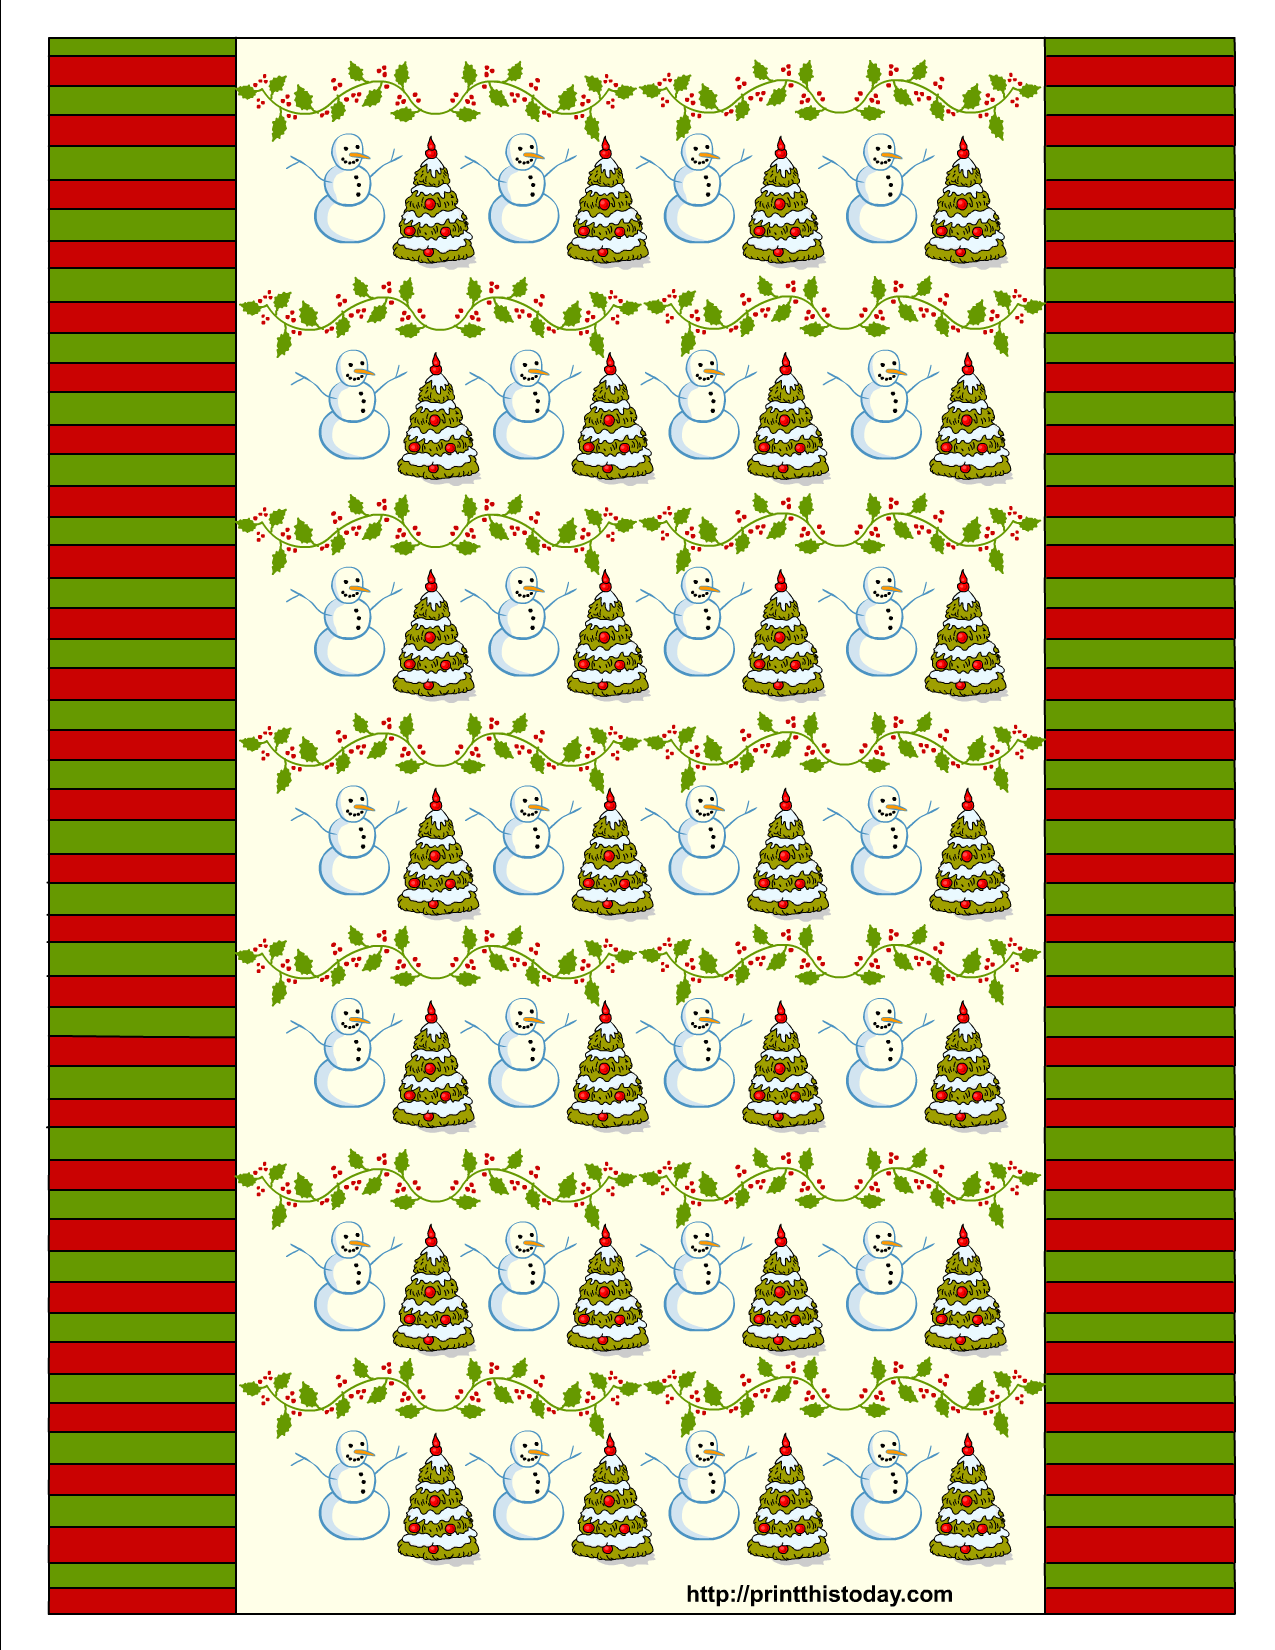 Free Printable Christmas Candy Wrappers